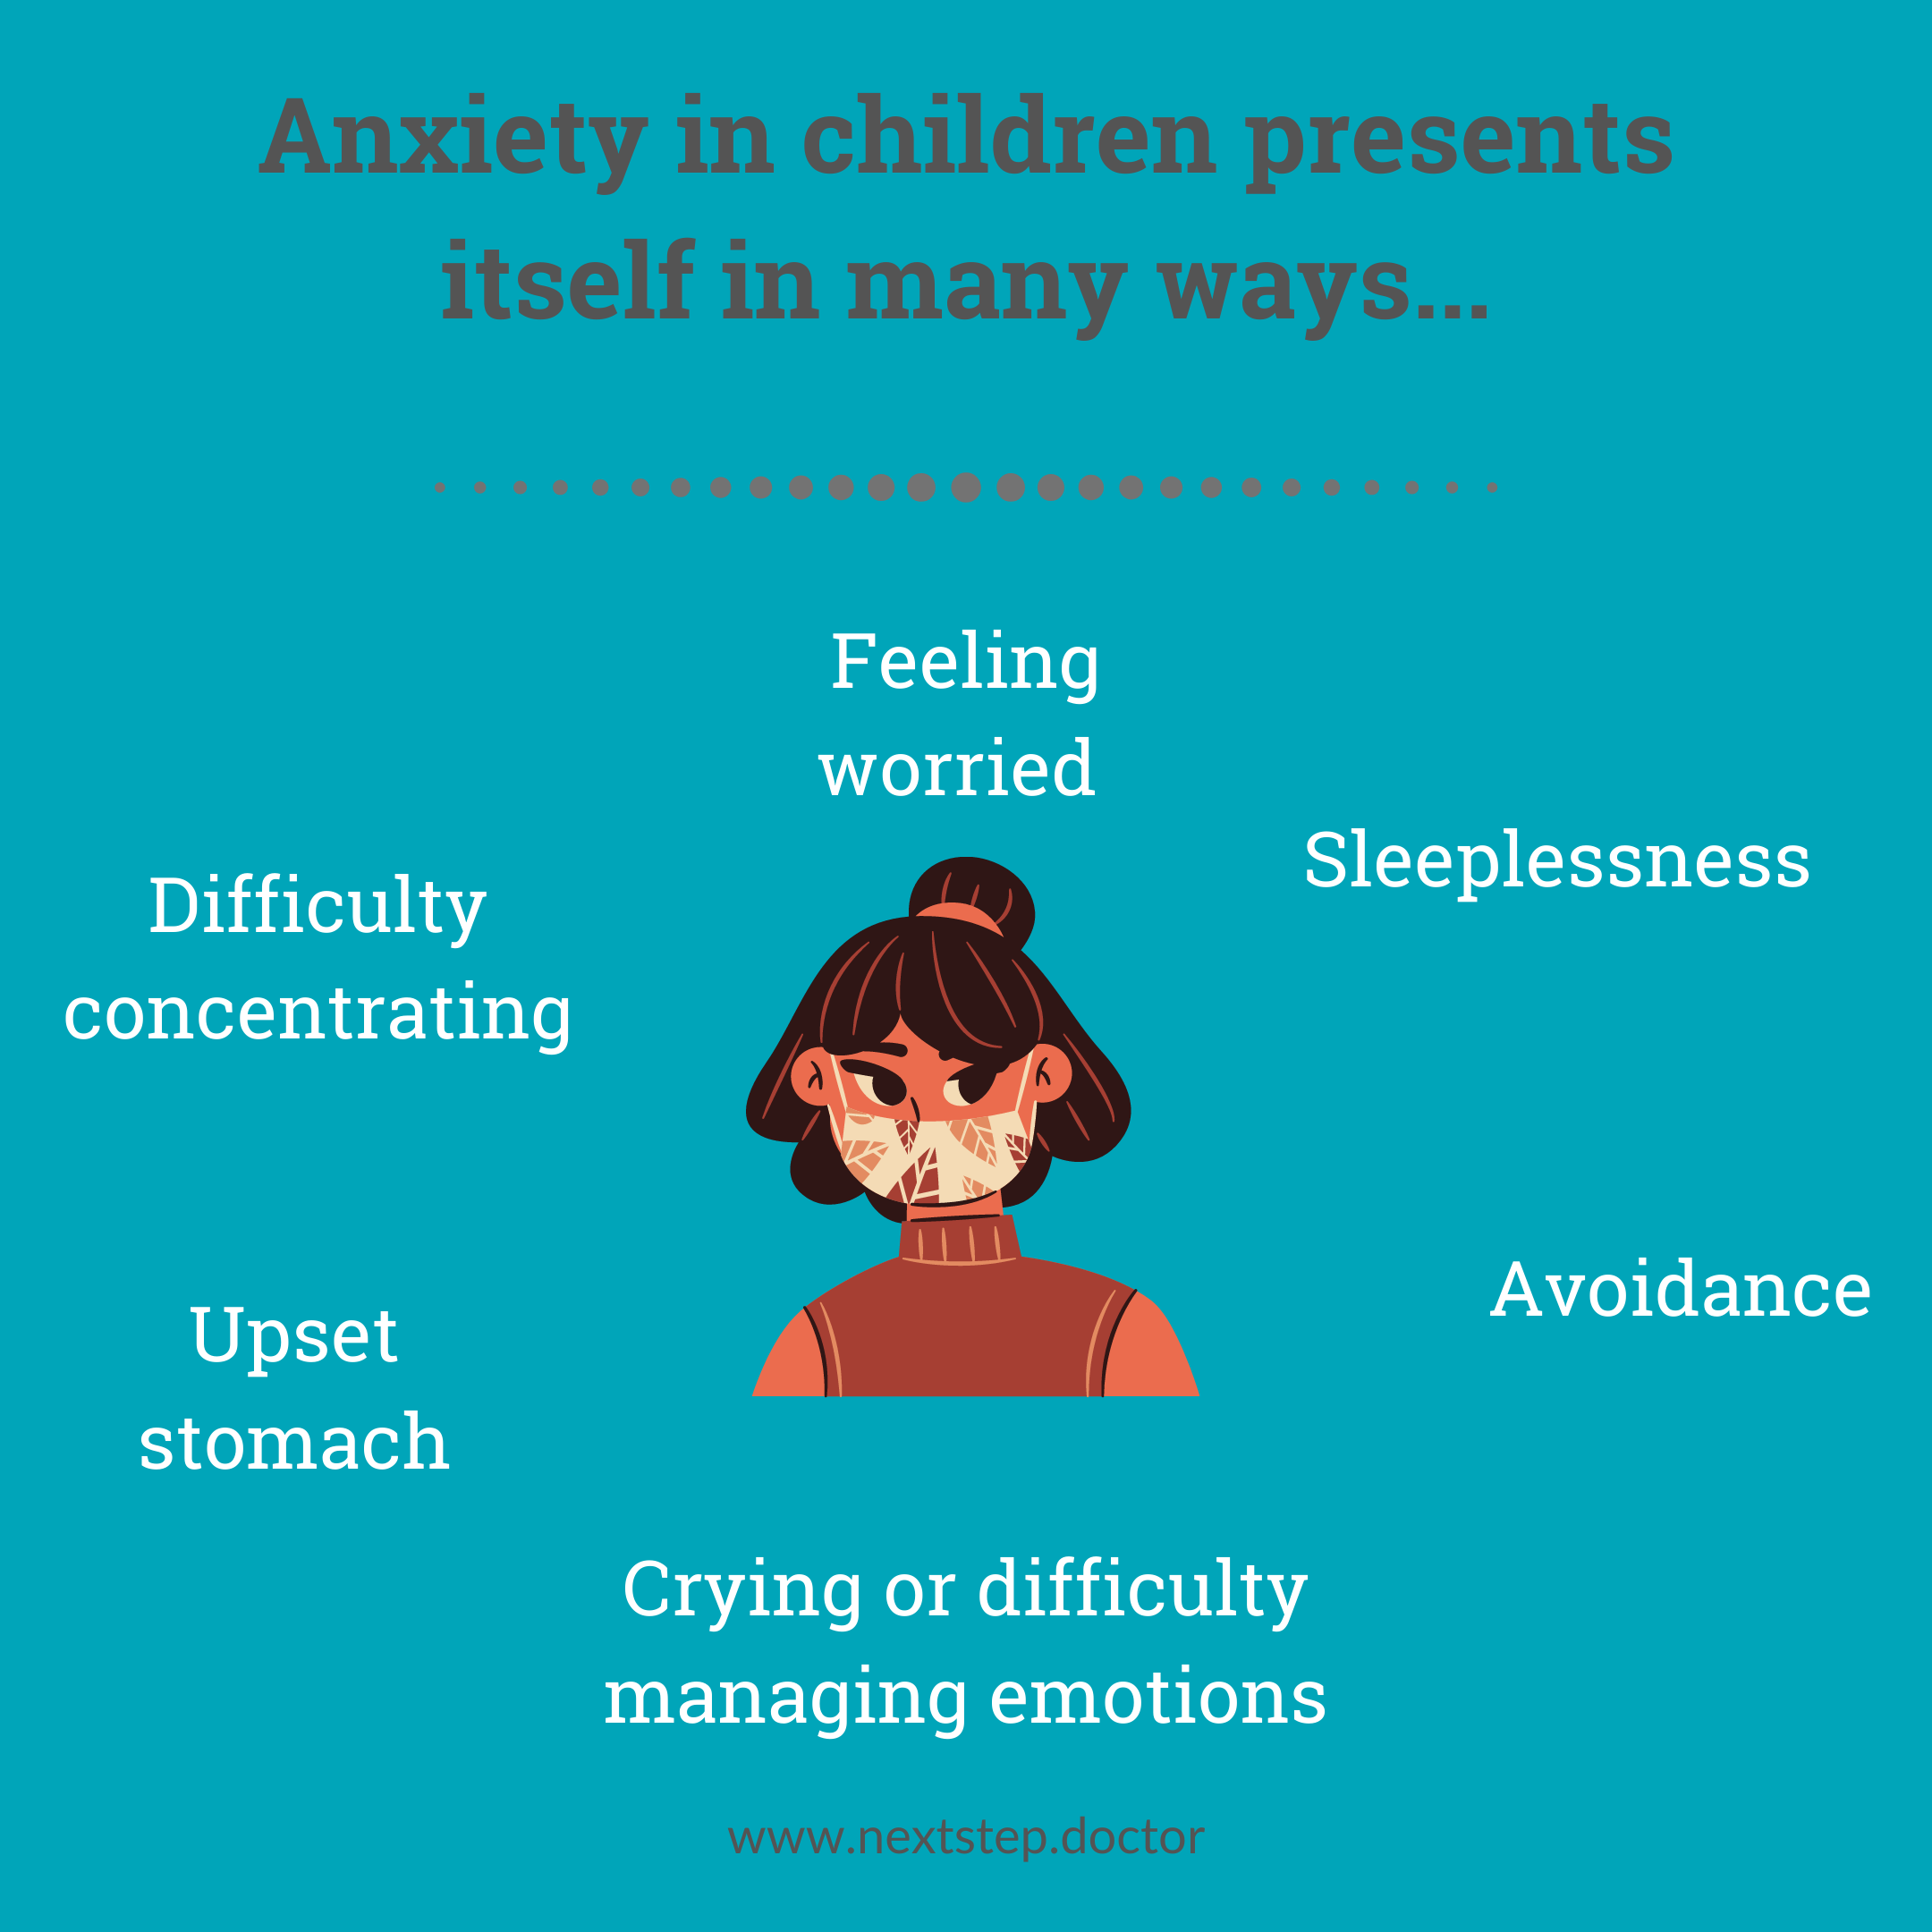 13 Ways to Help Children Cope with Back-to-School Anxiety - Next Step 2 Mental Health